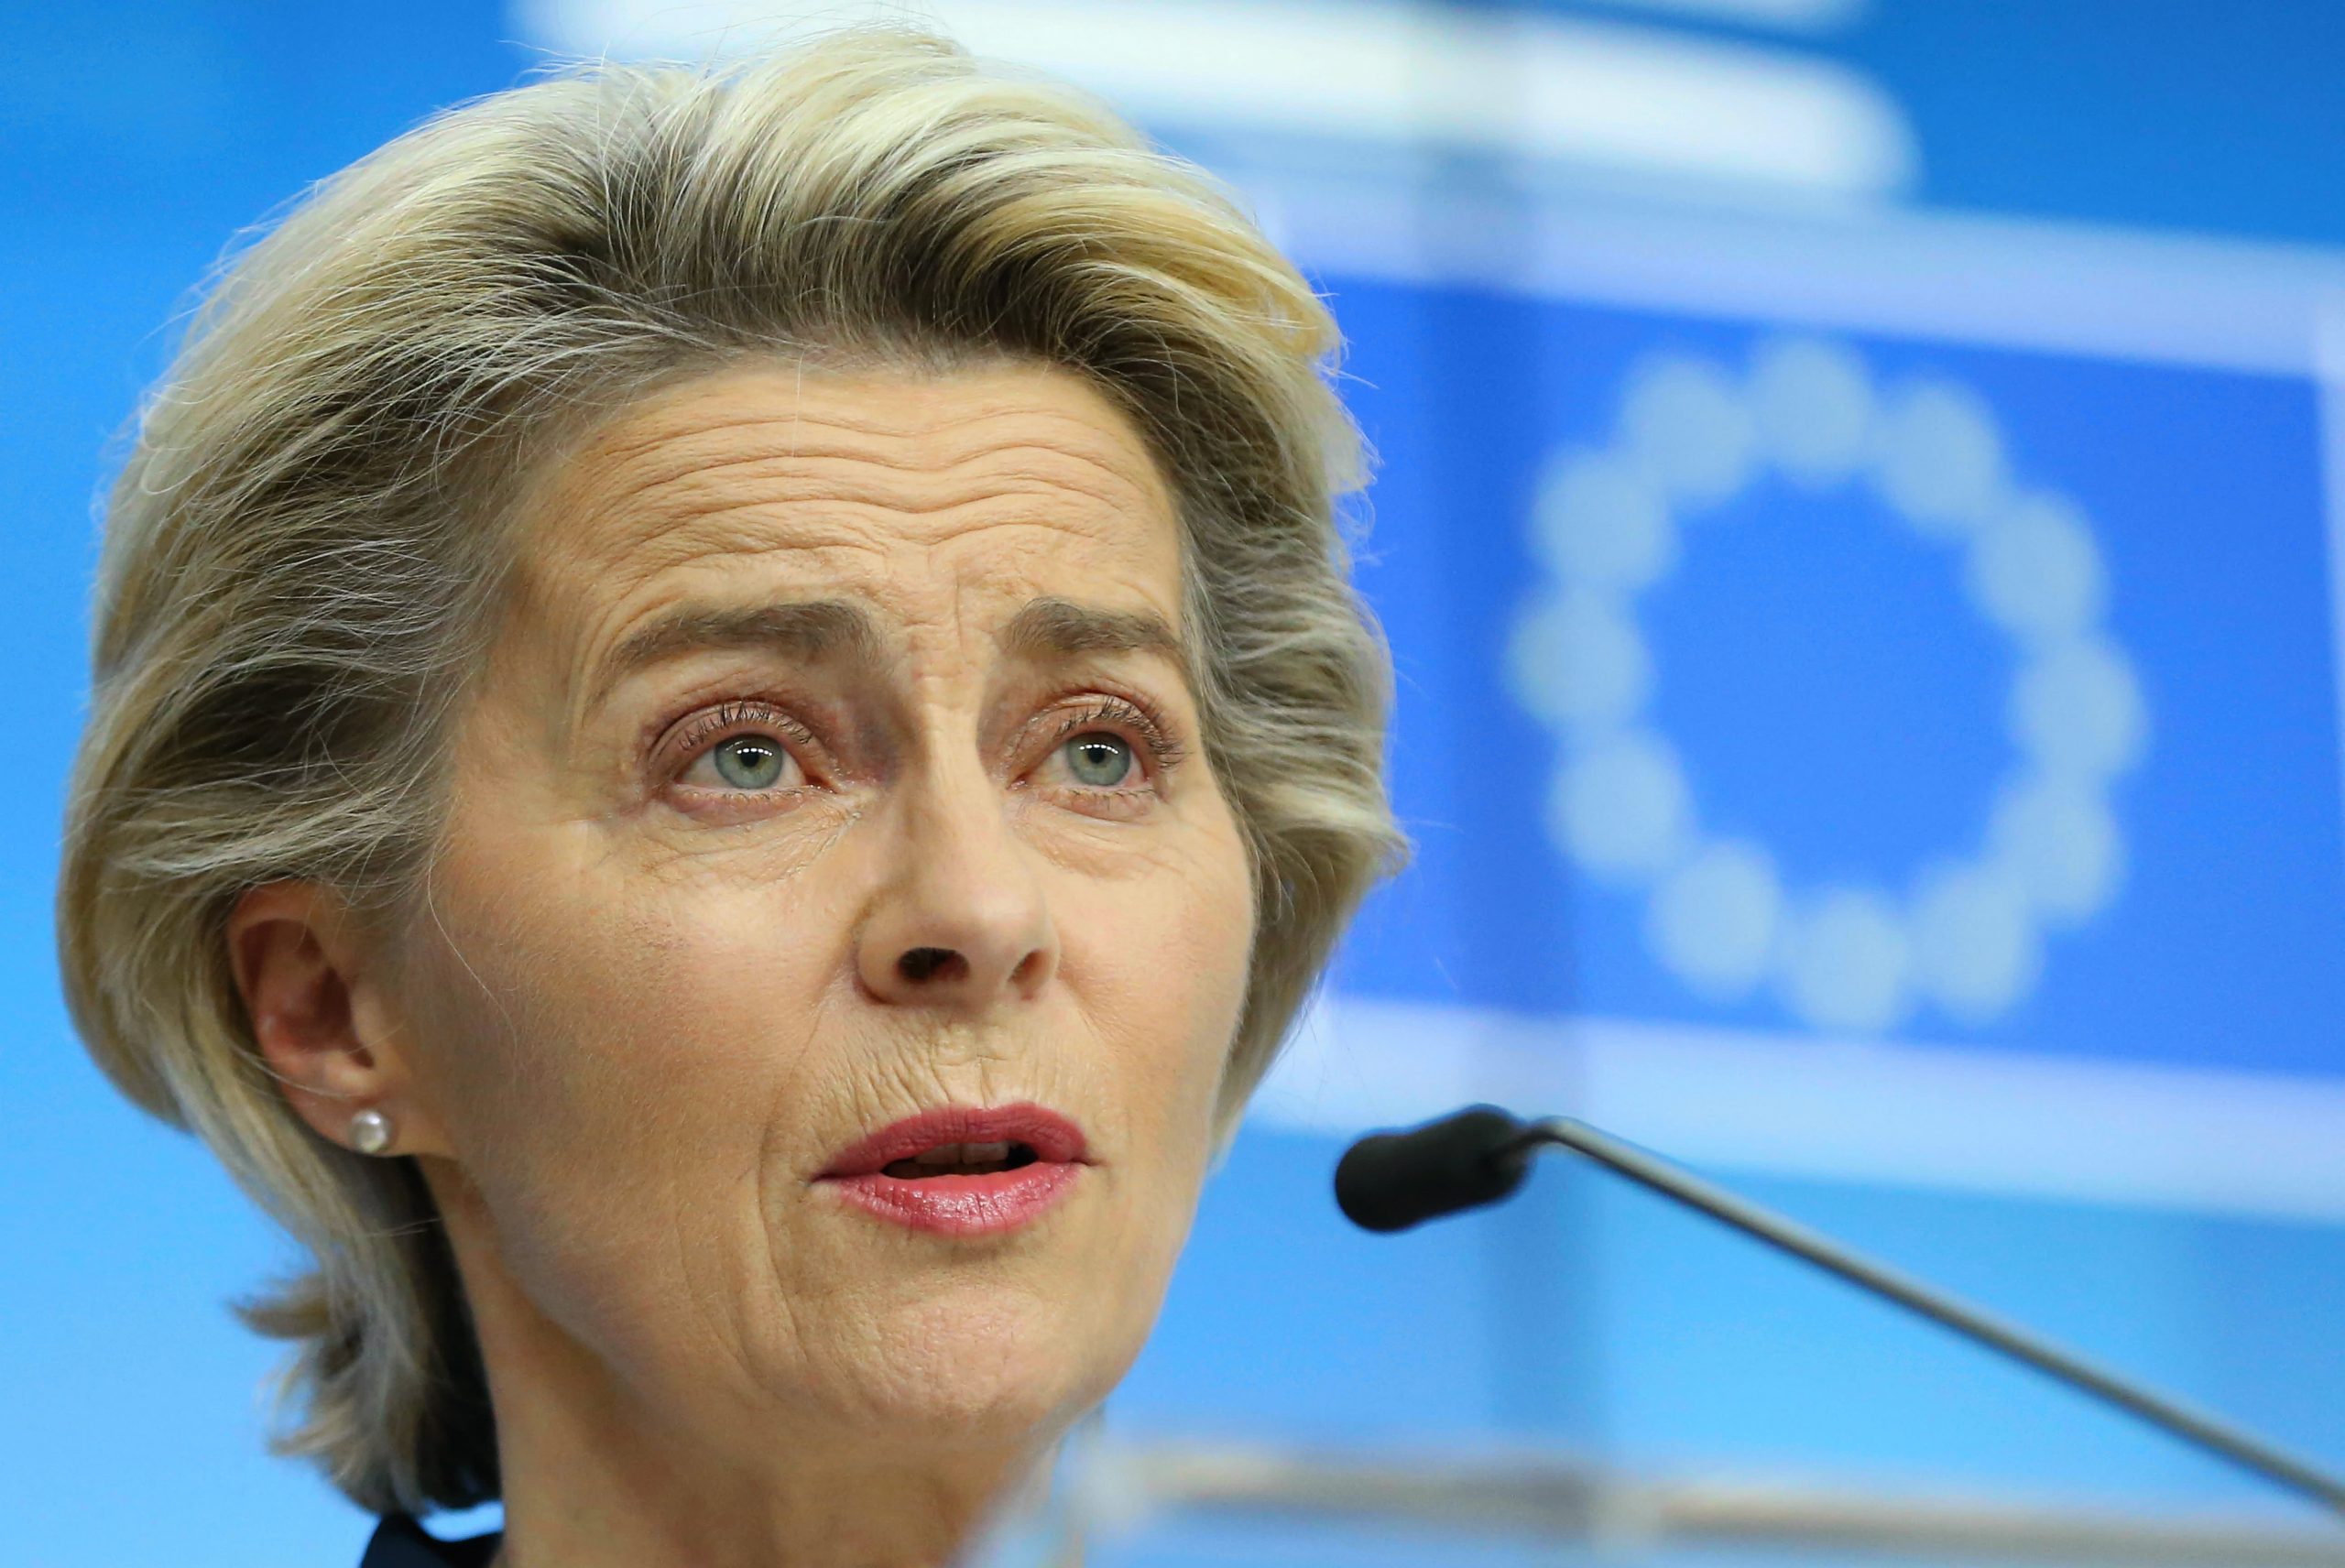 The European Union’s von der Leyen is urging a gradual lifting of lockdowns related to the Coronavirus